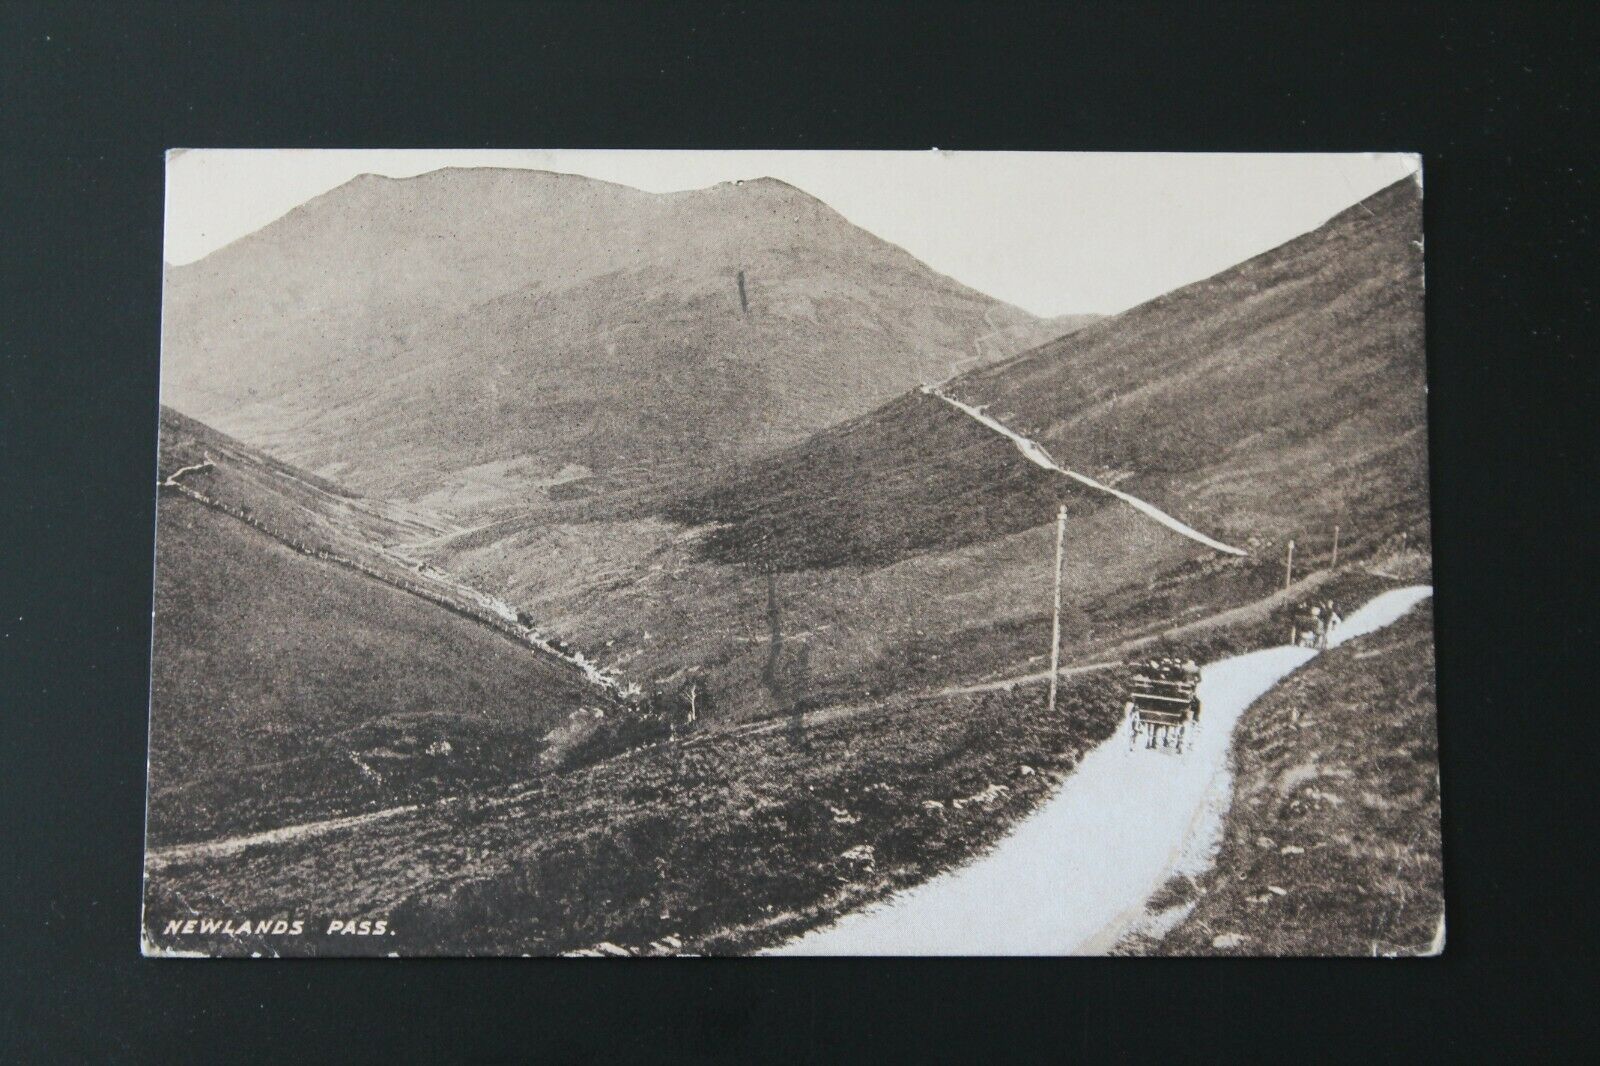 House Clearance - B & R's Camera Series - Newlands Pass, Lake District - posted 1921